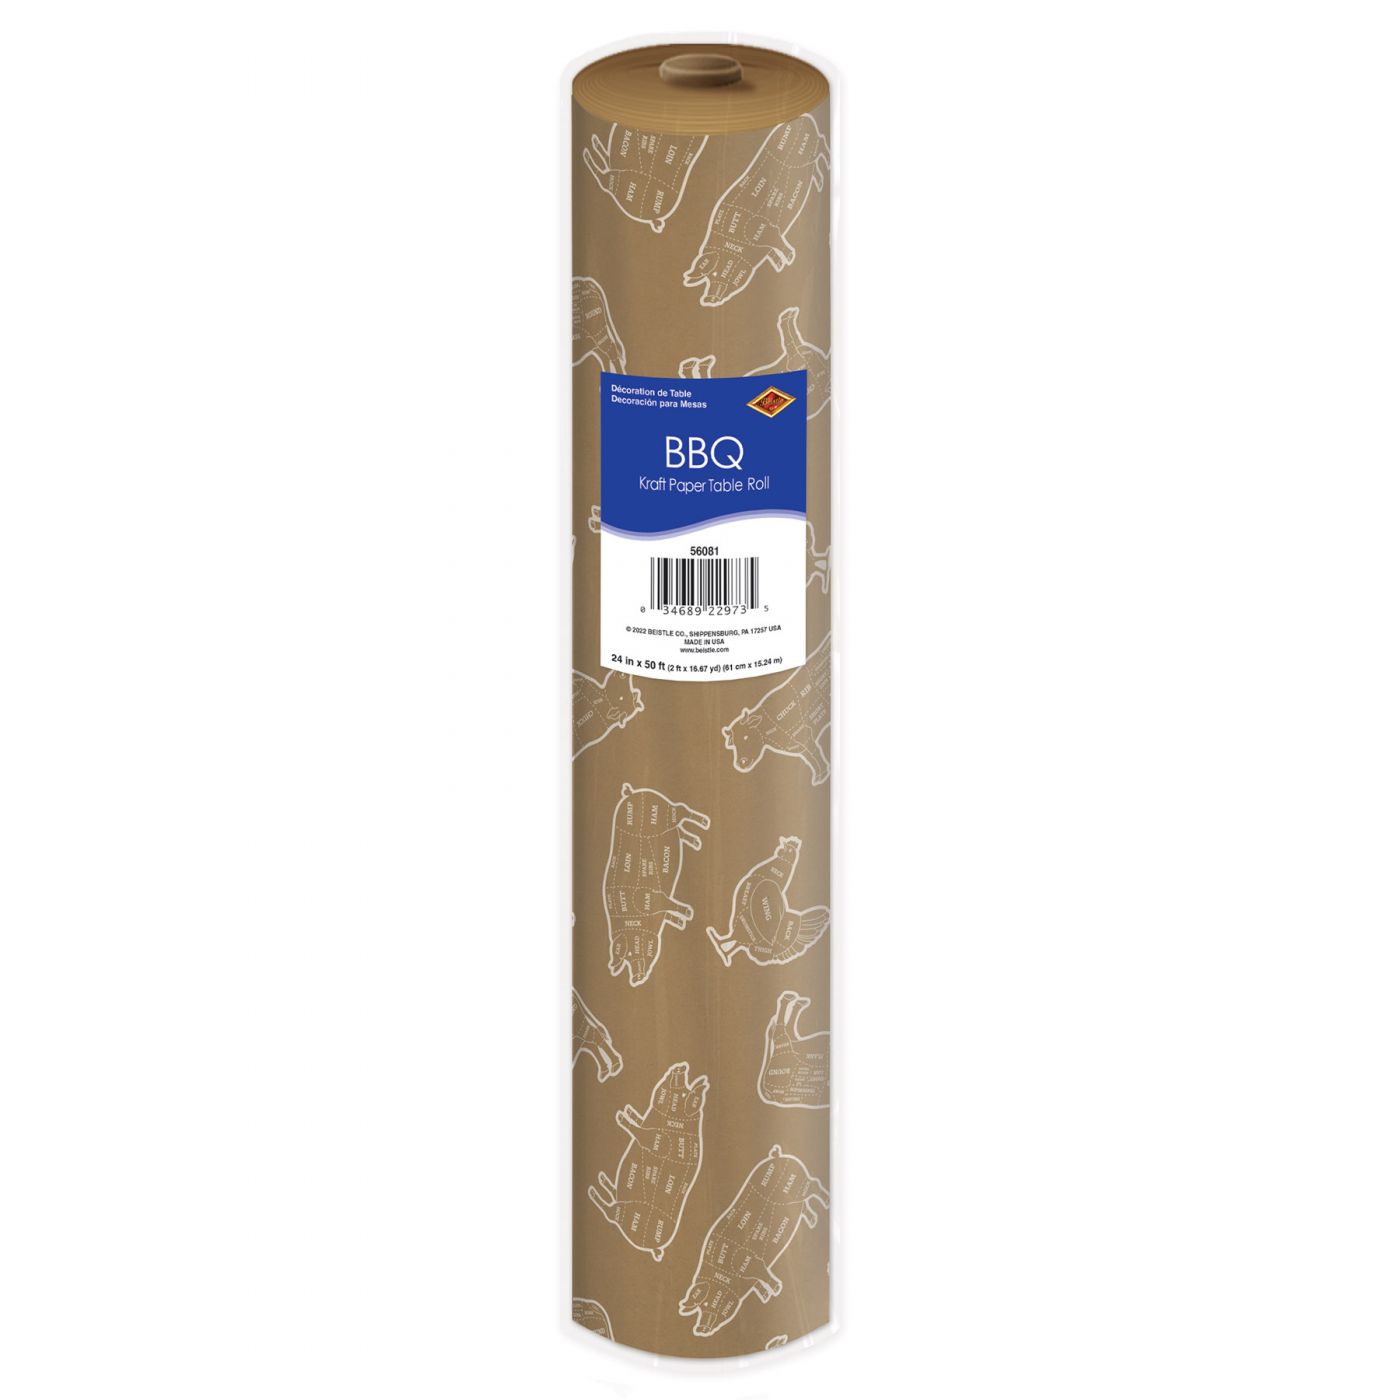 Image of BBQ Kraft Paper Table Roll (6)